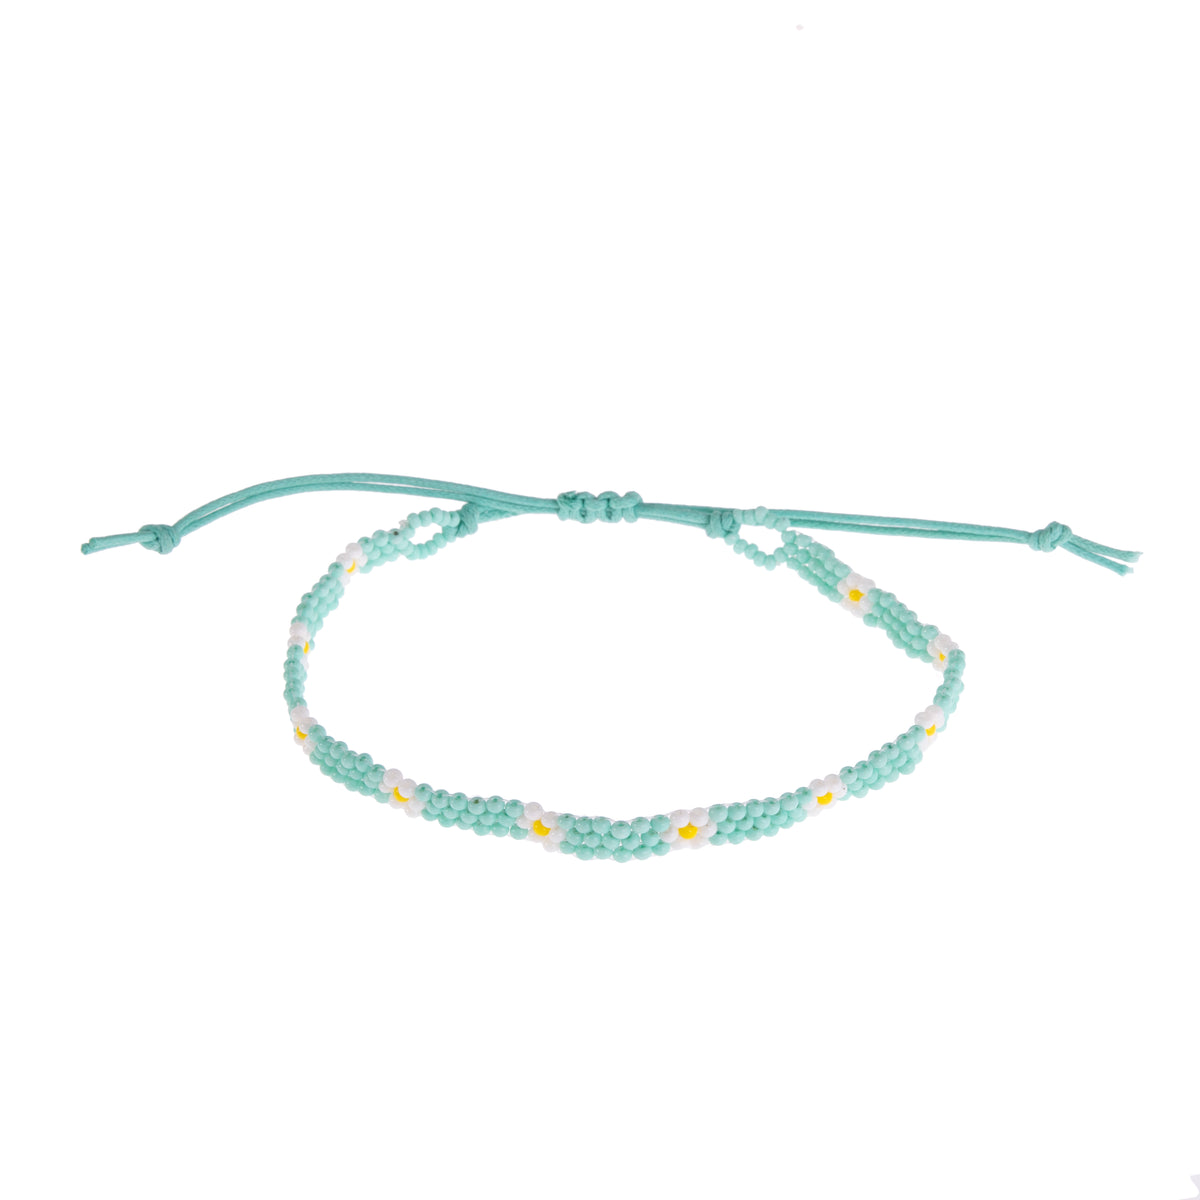 Colorful Handmade Seed Bead Daisy Anklet